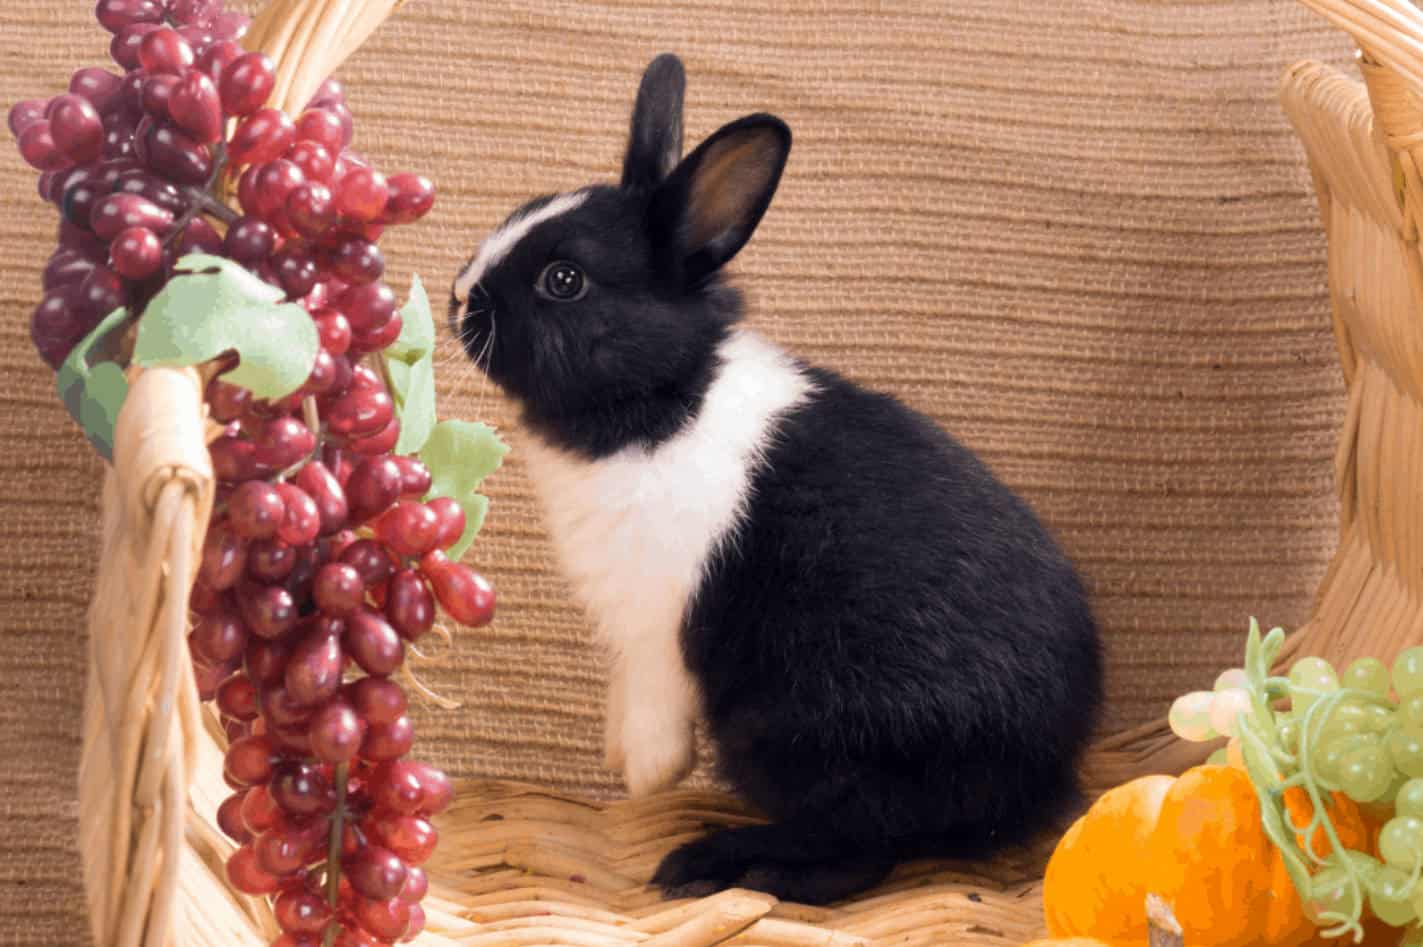 grapes for bunnies